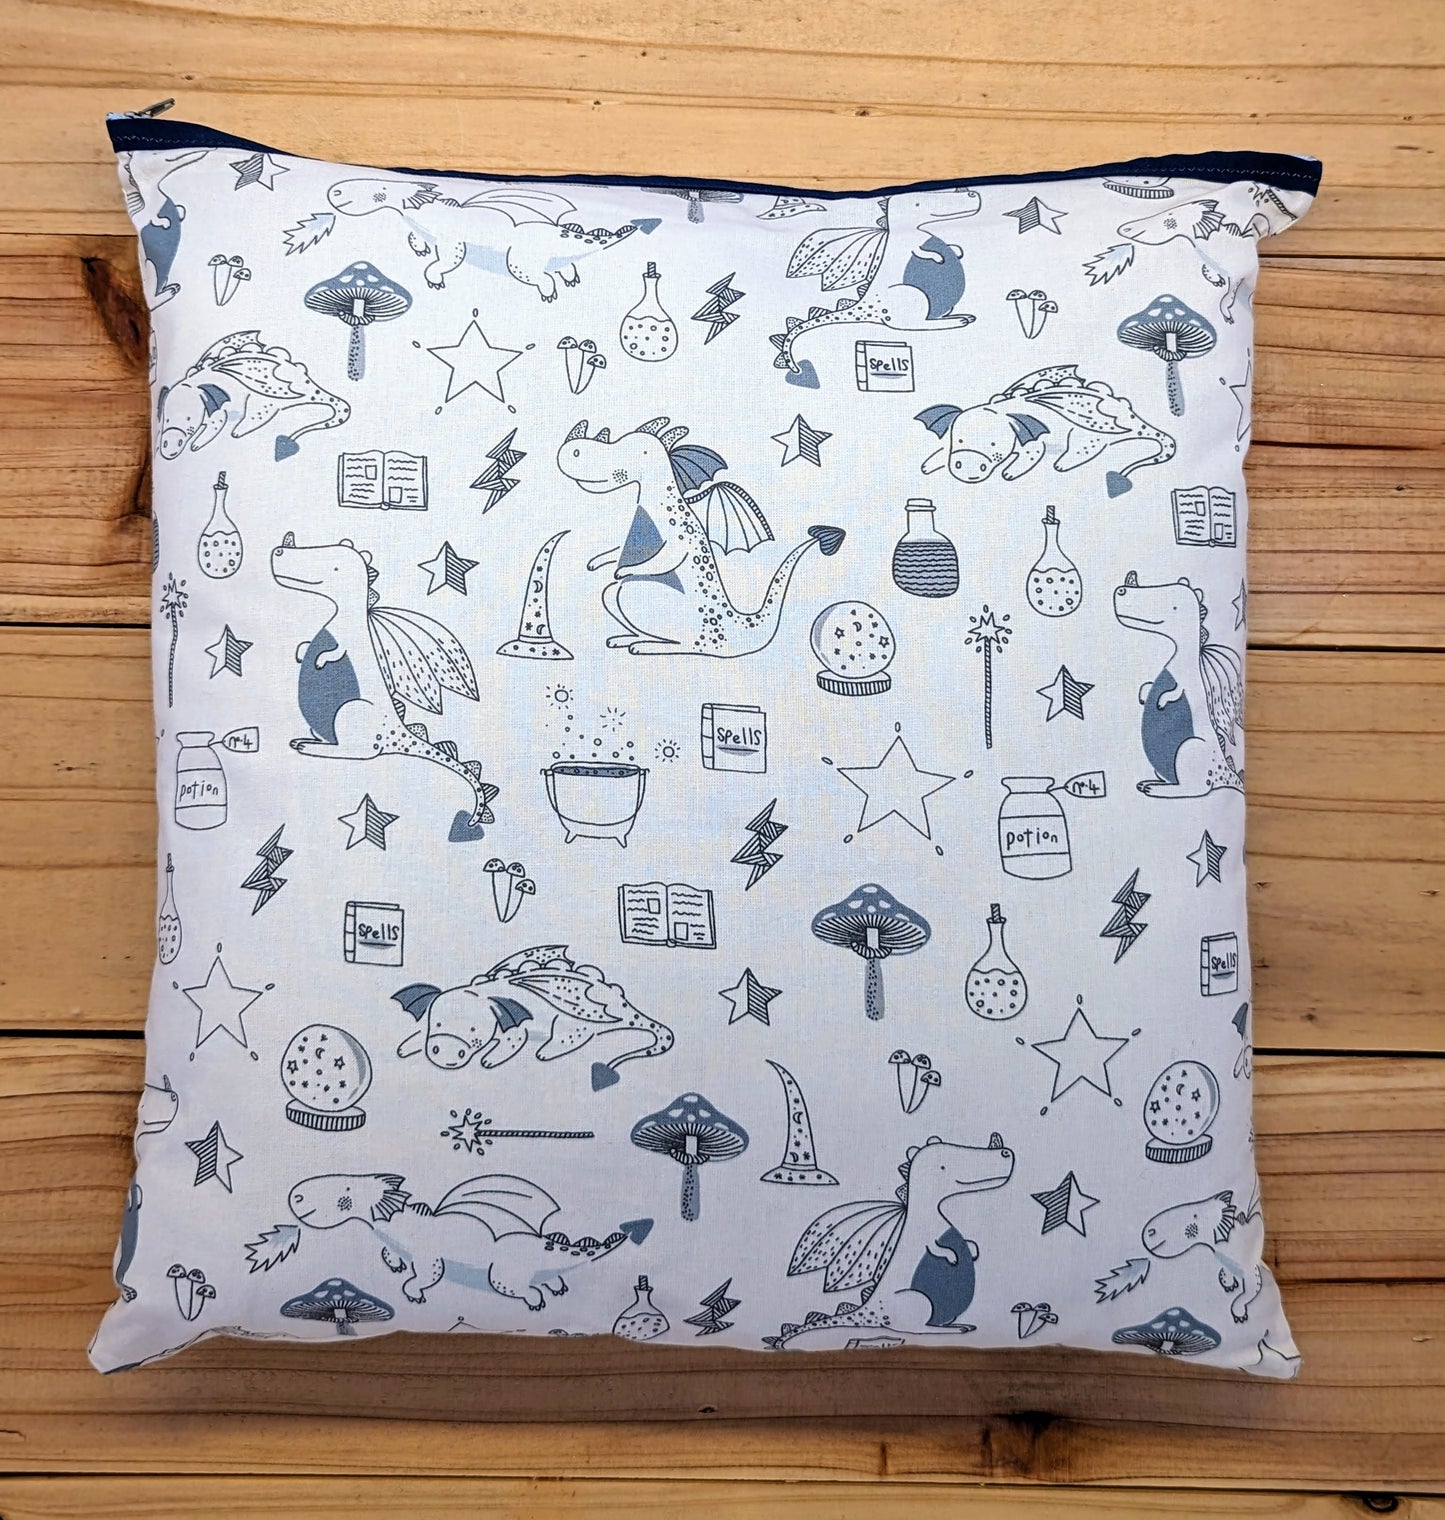 Reading Is Magical Book Pillow With Pocket